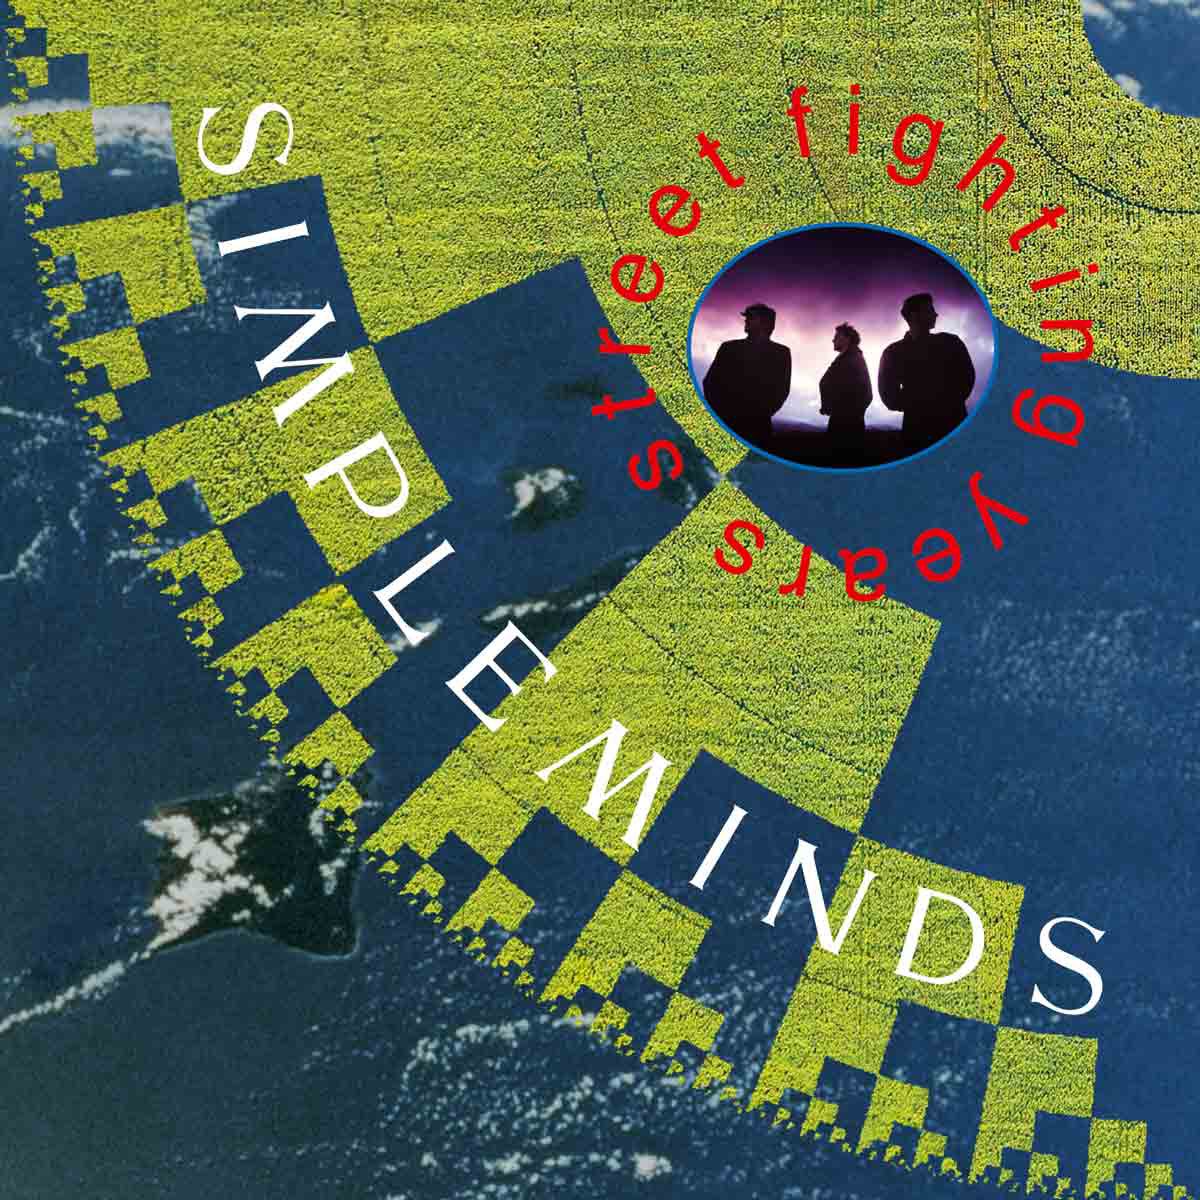 #SimpleMinds 
‘Belfast Child’ from the album ‘Street Fighting Years’ released today in 1989

‘So come back Billy, won't you come on home?
Come back Mary, you've been away so long
The streets are empty, and your mother's gone
The girls are crying, it's been oh so long
And your…